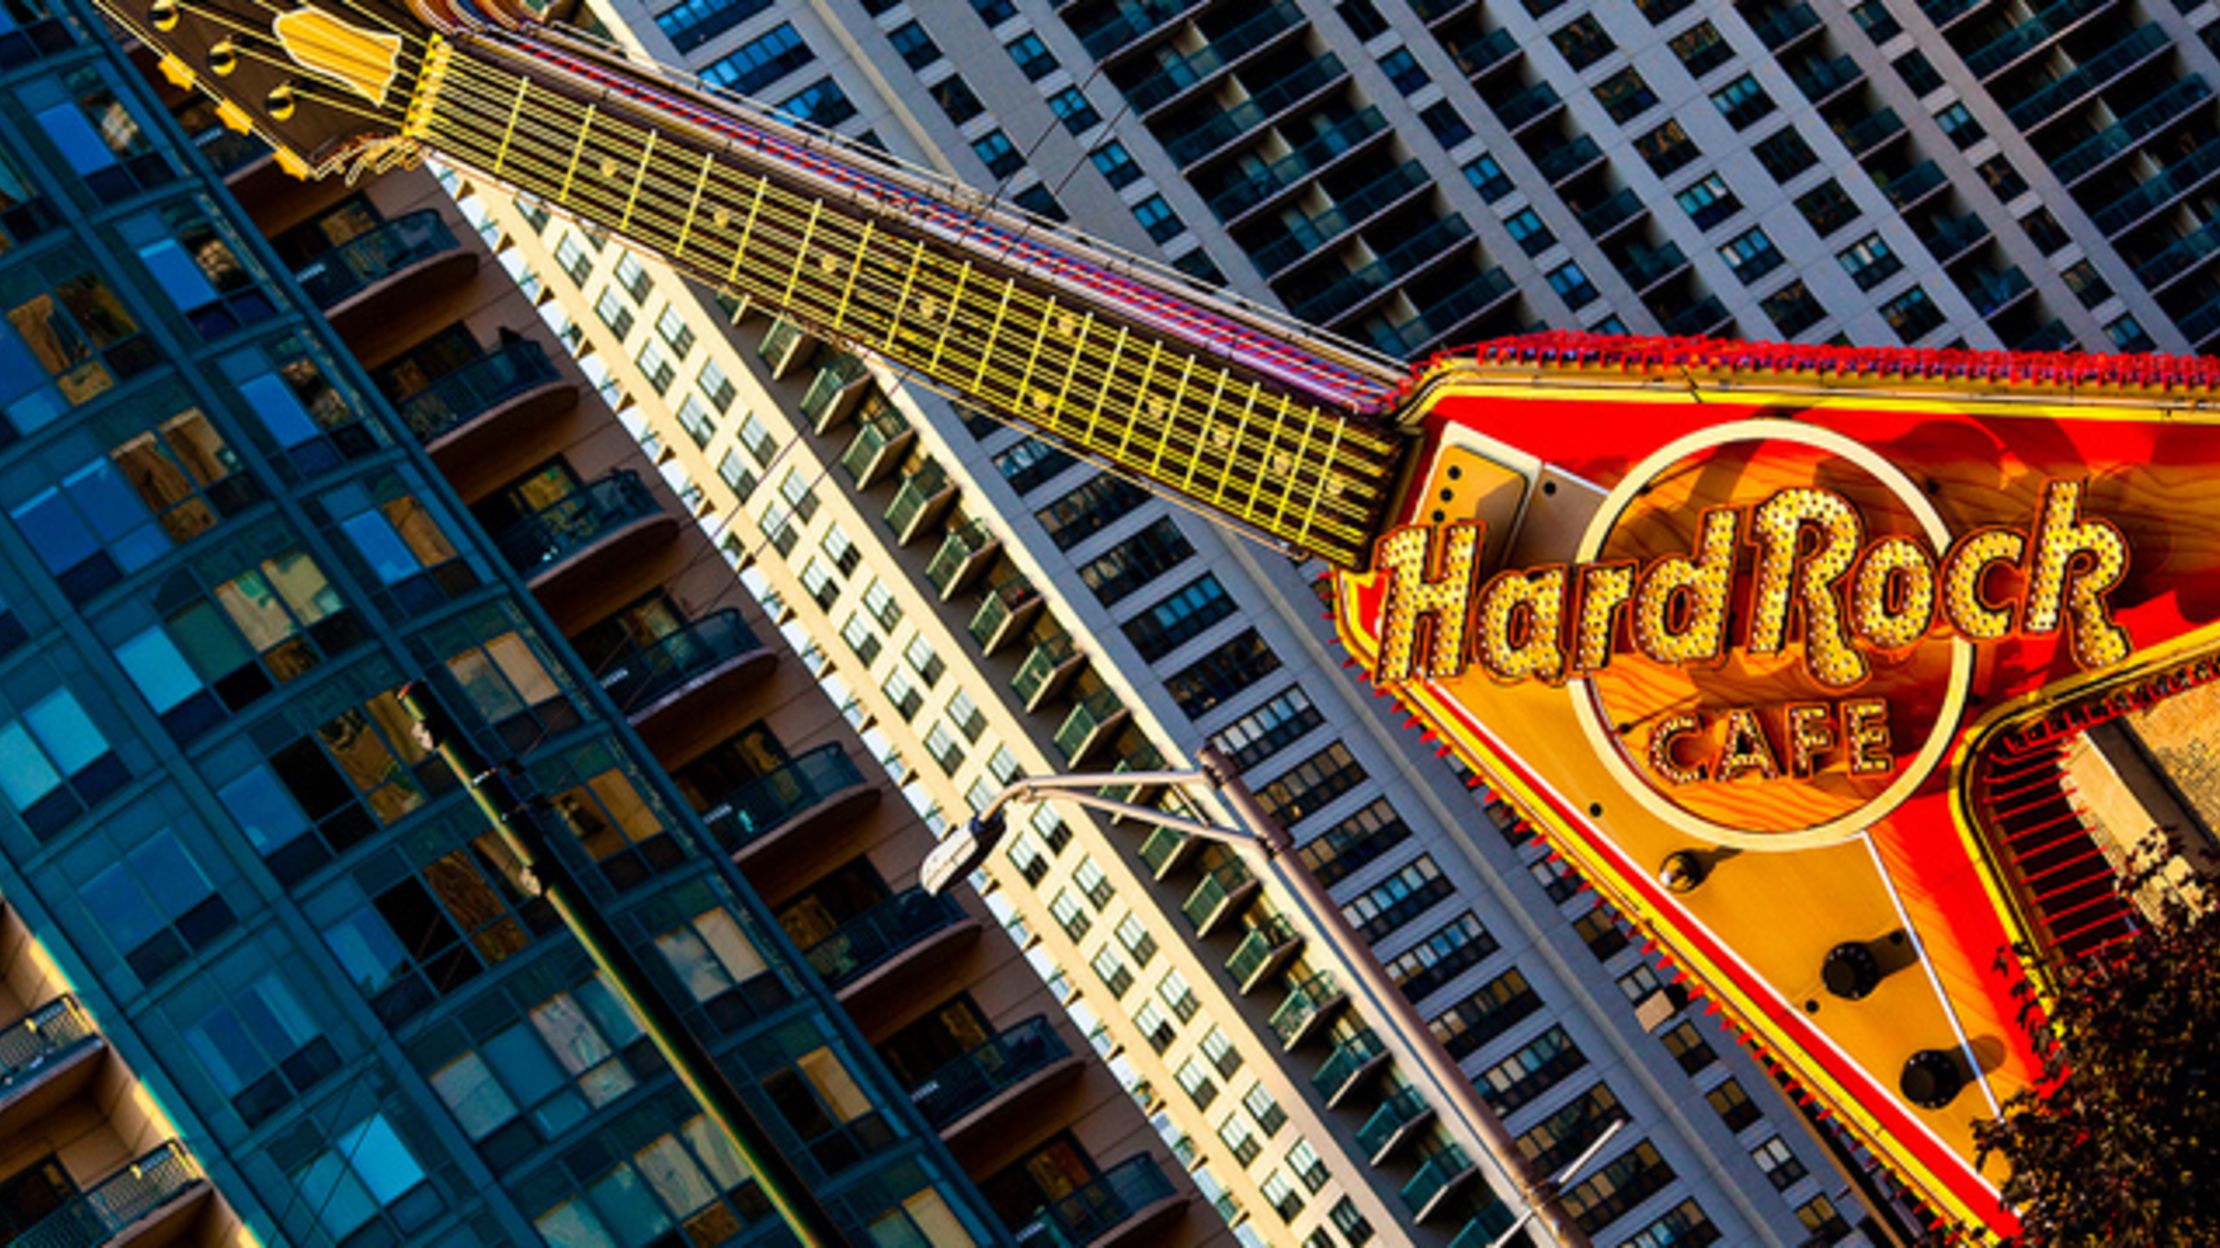 13 Rocking Facts About Hard Rock Cafe Mental Floss